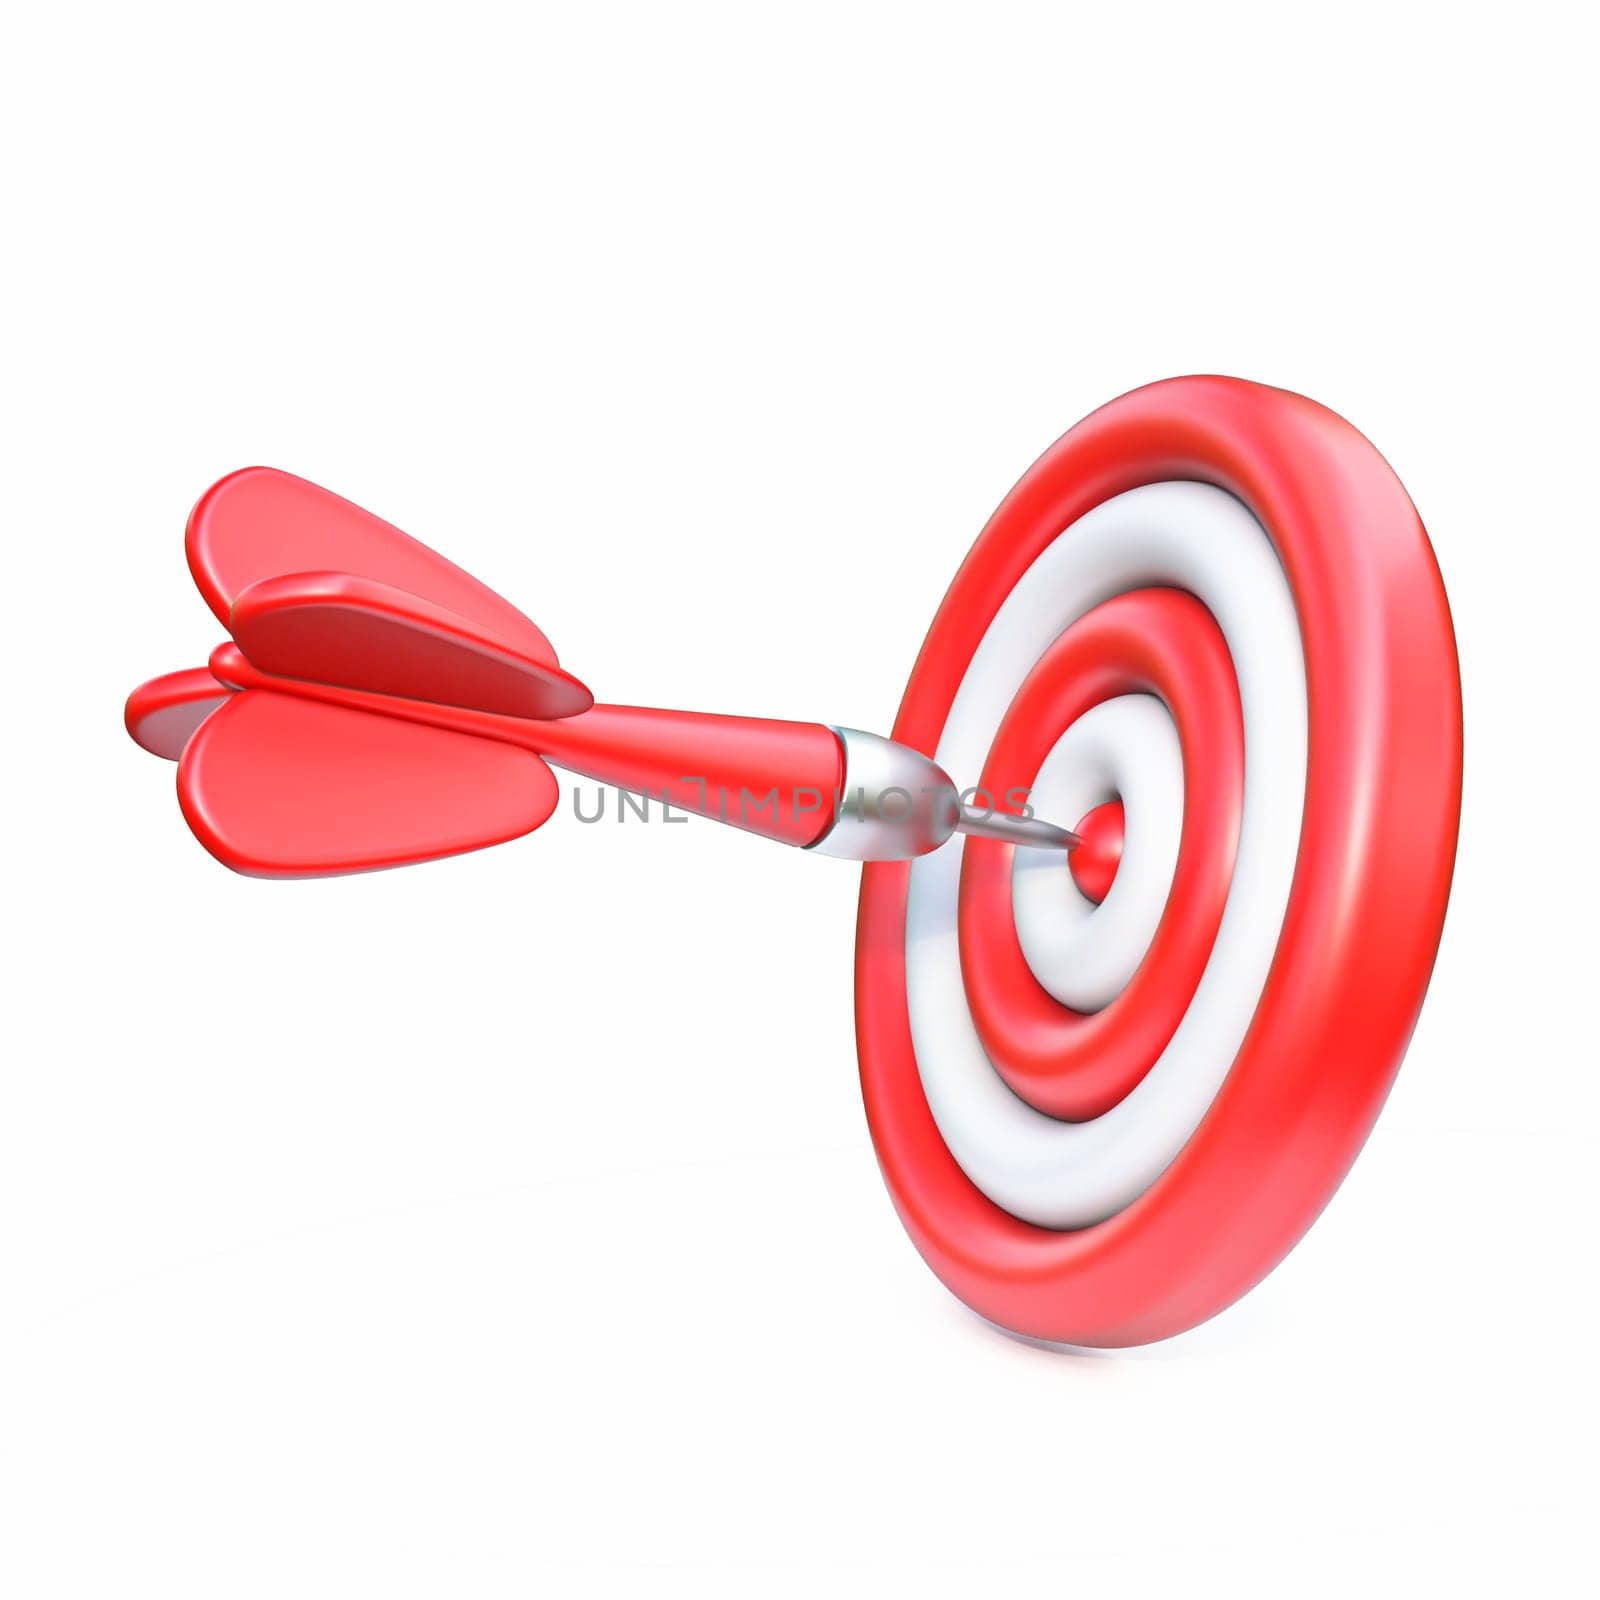 Red cartoon dart target 3D rendering illustration isolated on white background